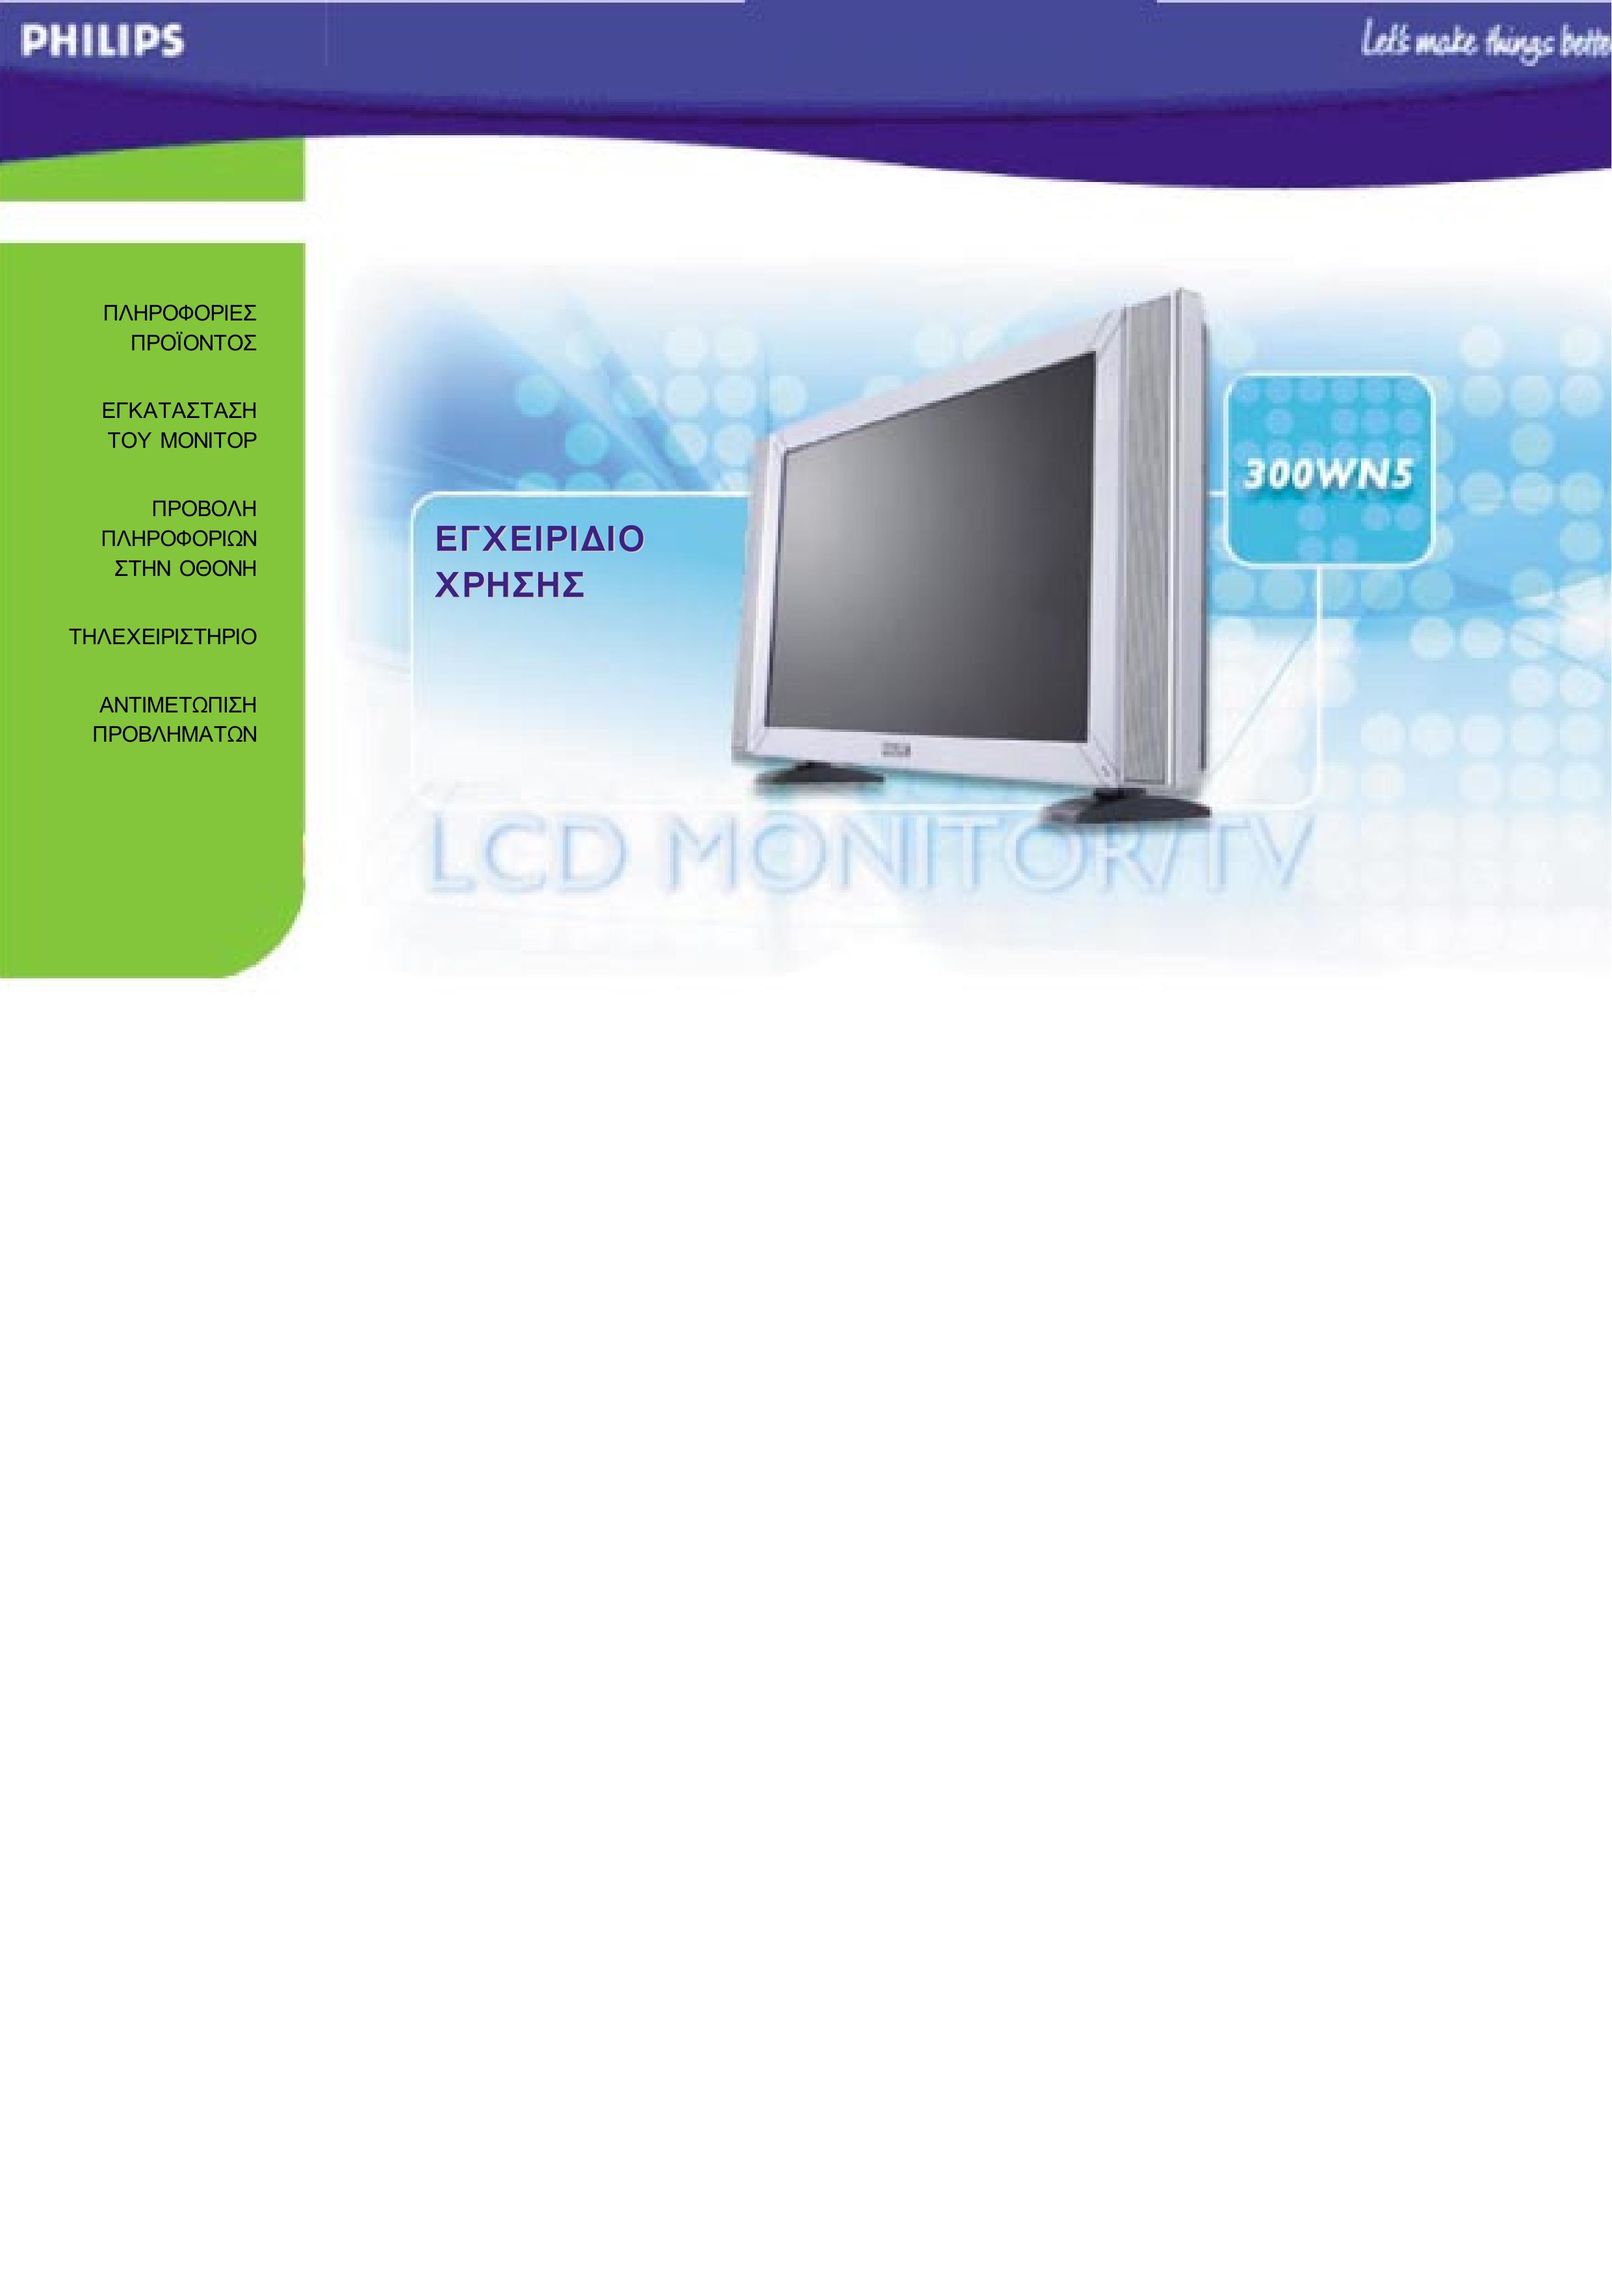 Sony 300WN5 Flat Panel Television User Manual